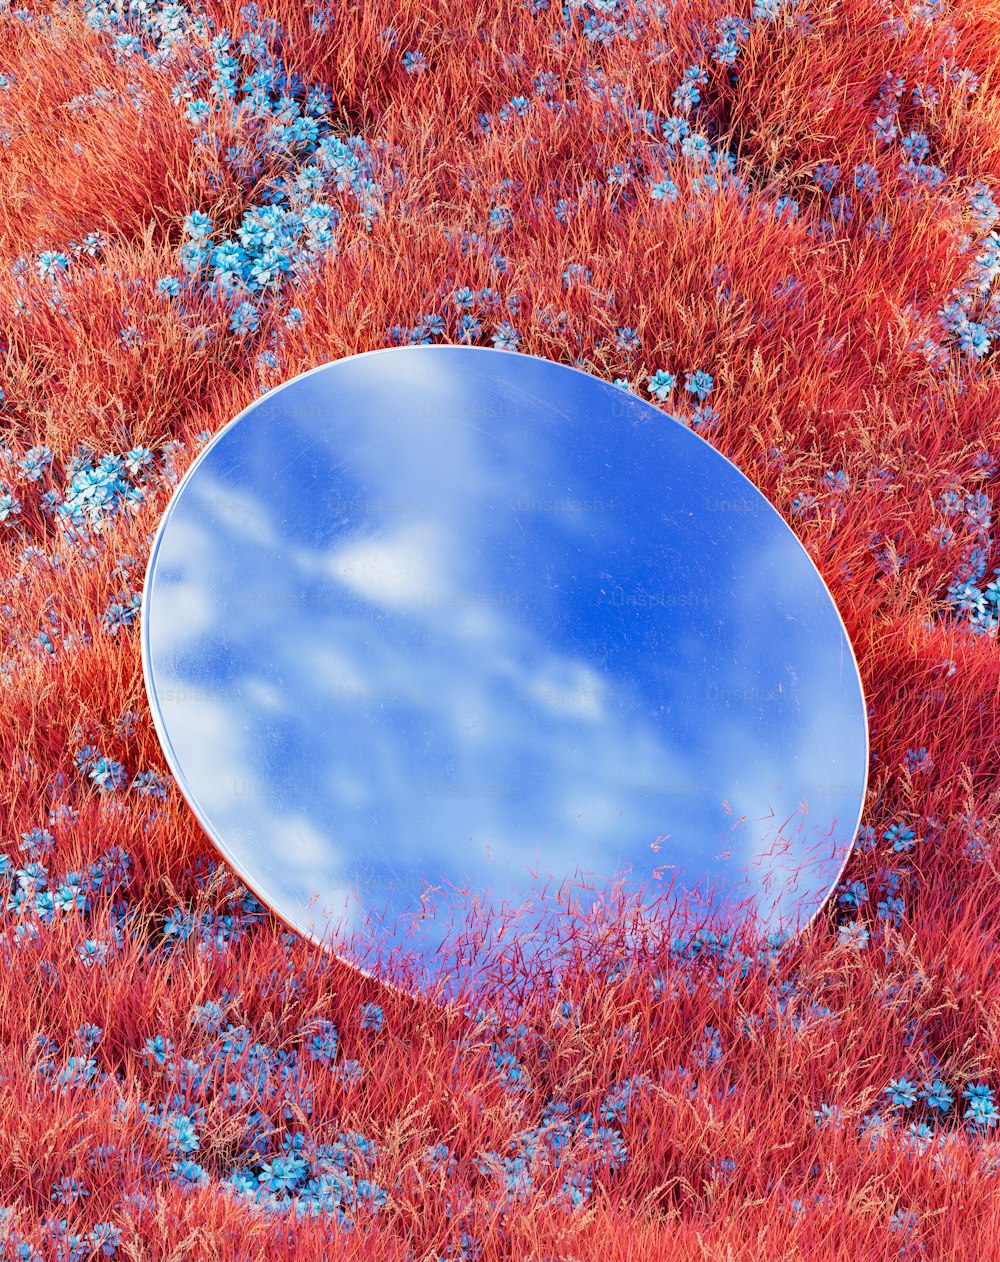 a round mirror sitting on top of a grass covered field